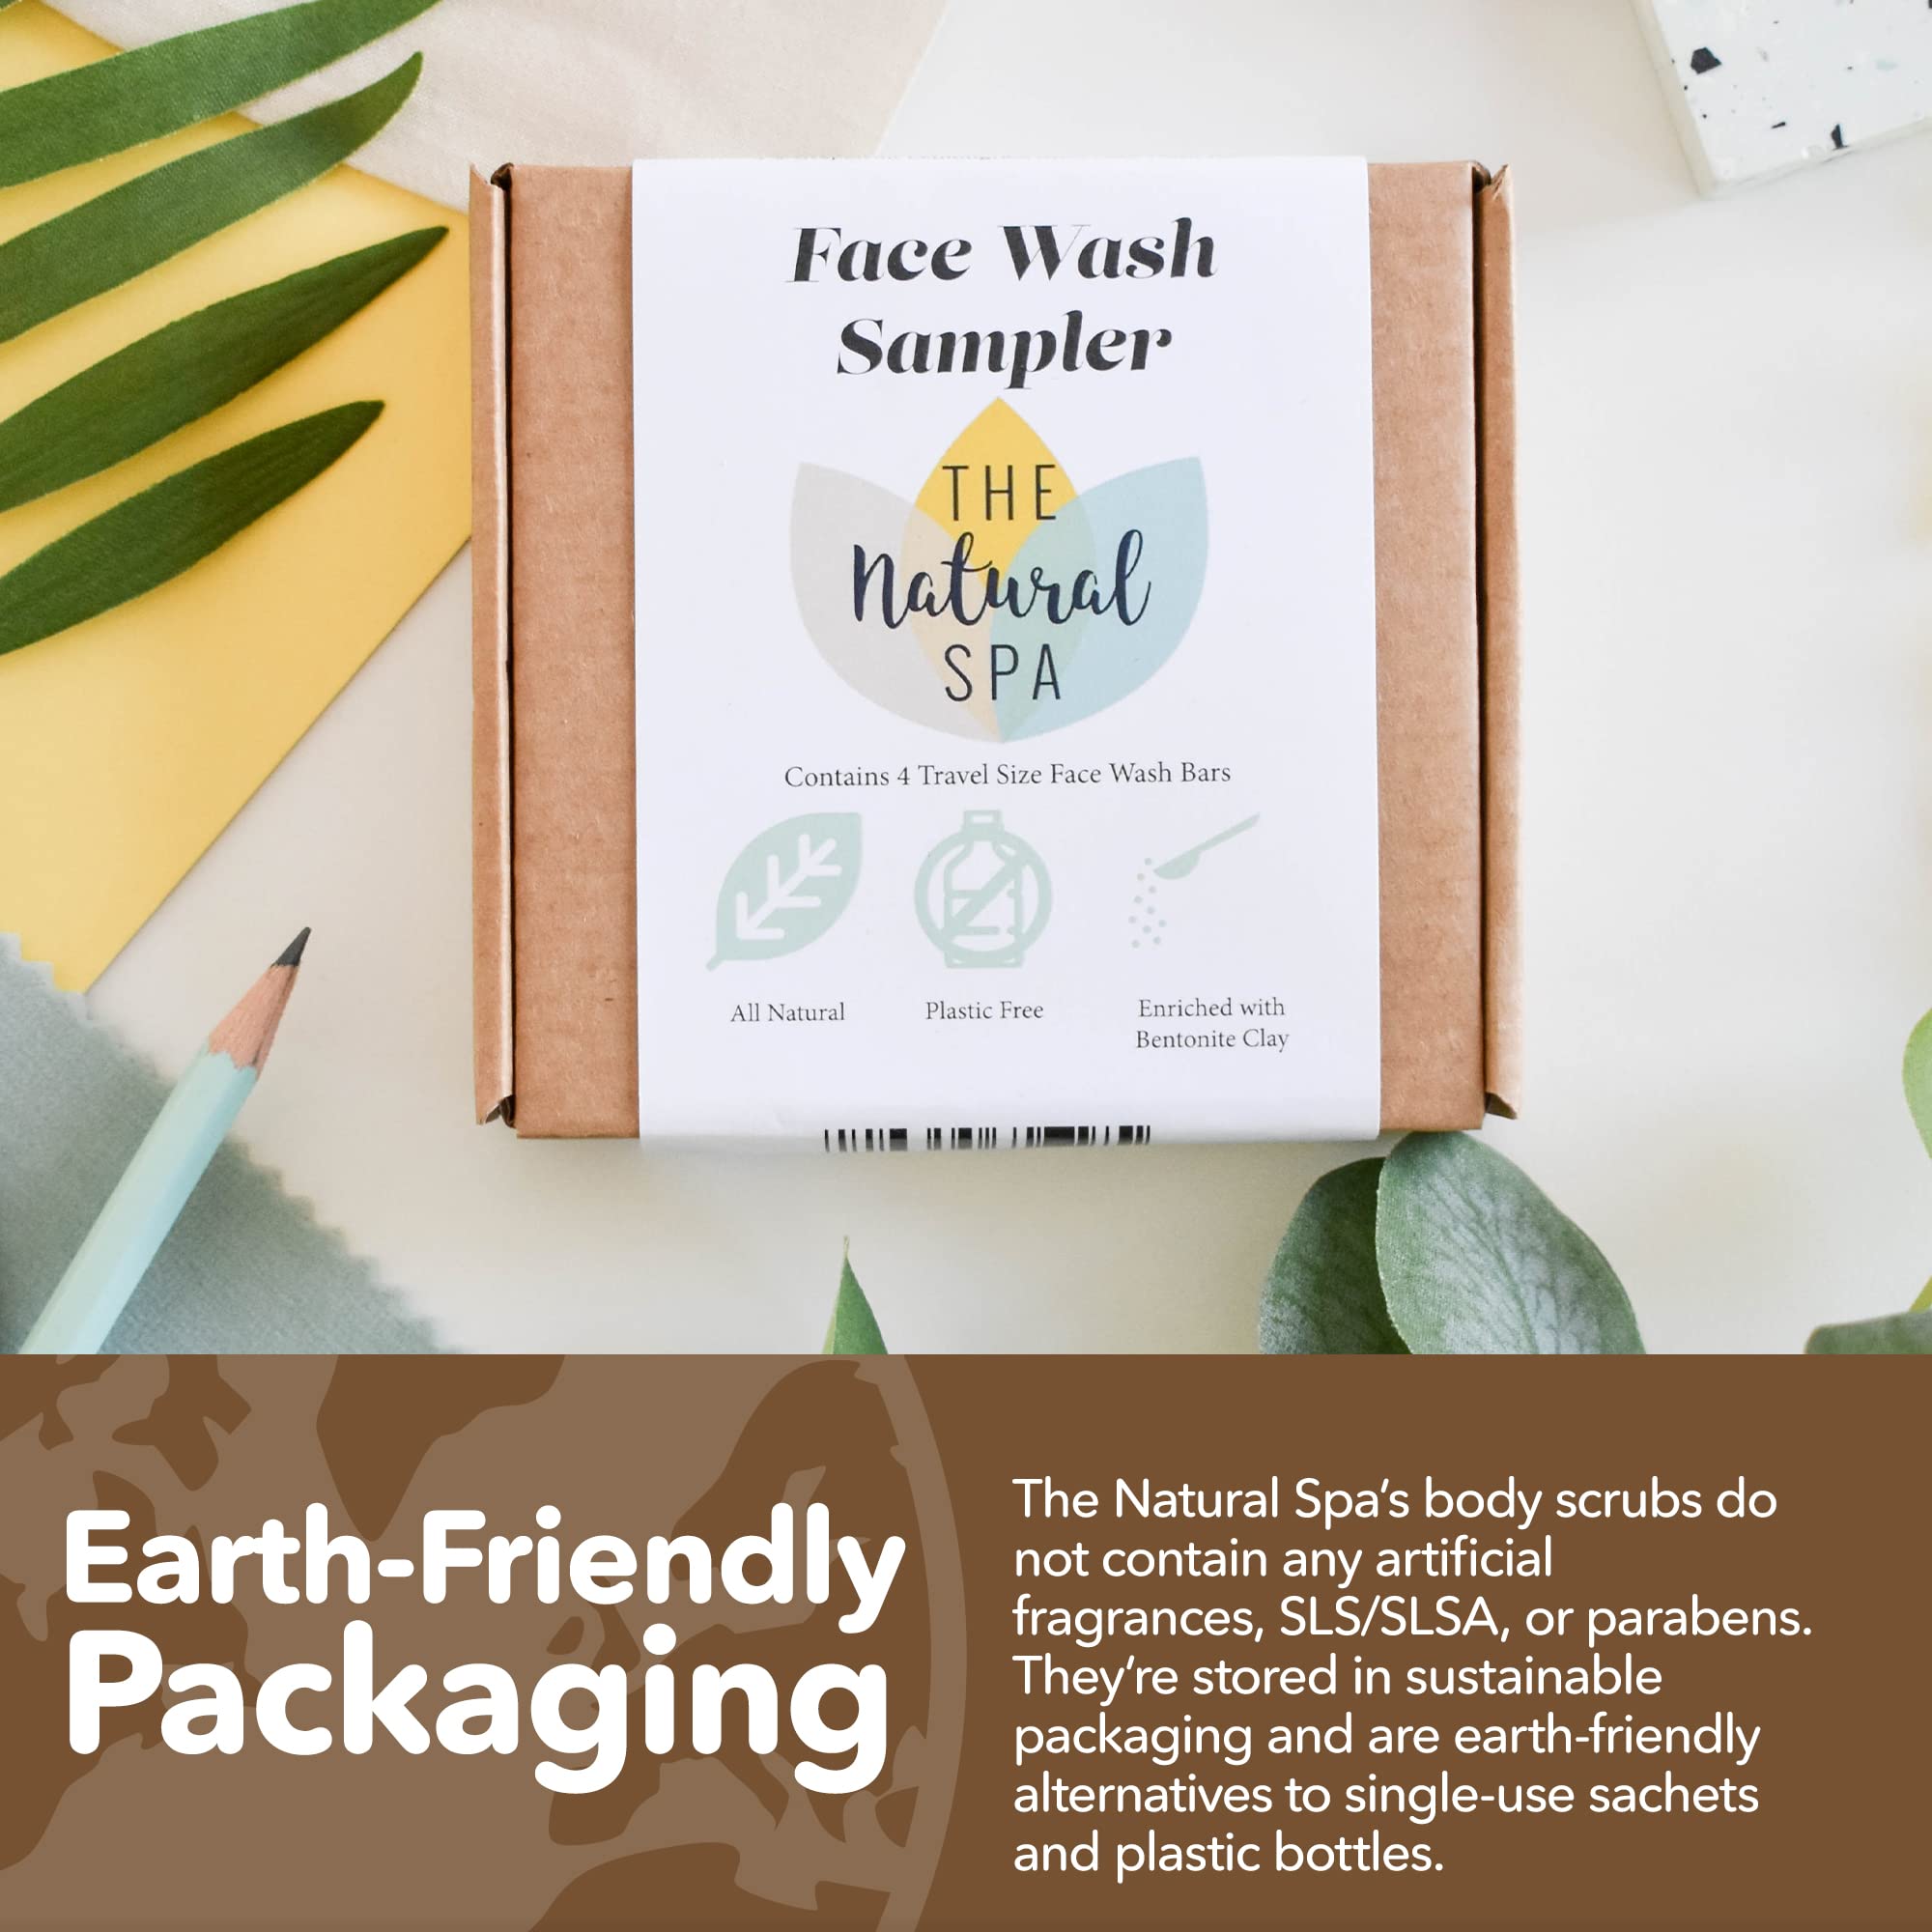 the Natural Spa Face Wash Bar Sampler Box, Includes 4 Handcrafted Vegan Face Soap Bars, Unique Beauty Gifts Sets for Women, Gift-Ready Skin Care Bars in Letterbox Packaging, Box of 4 15g bars